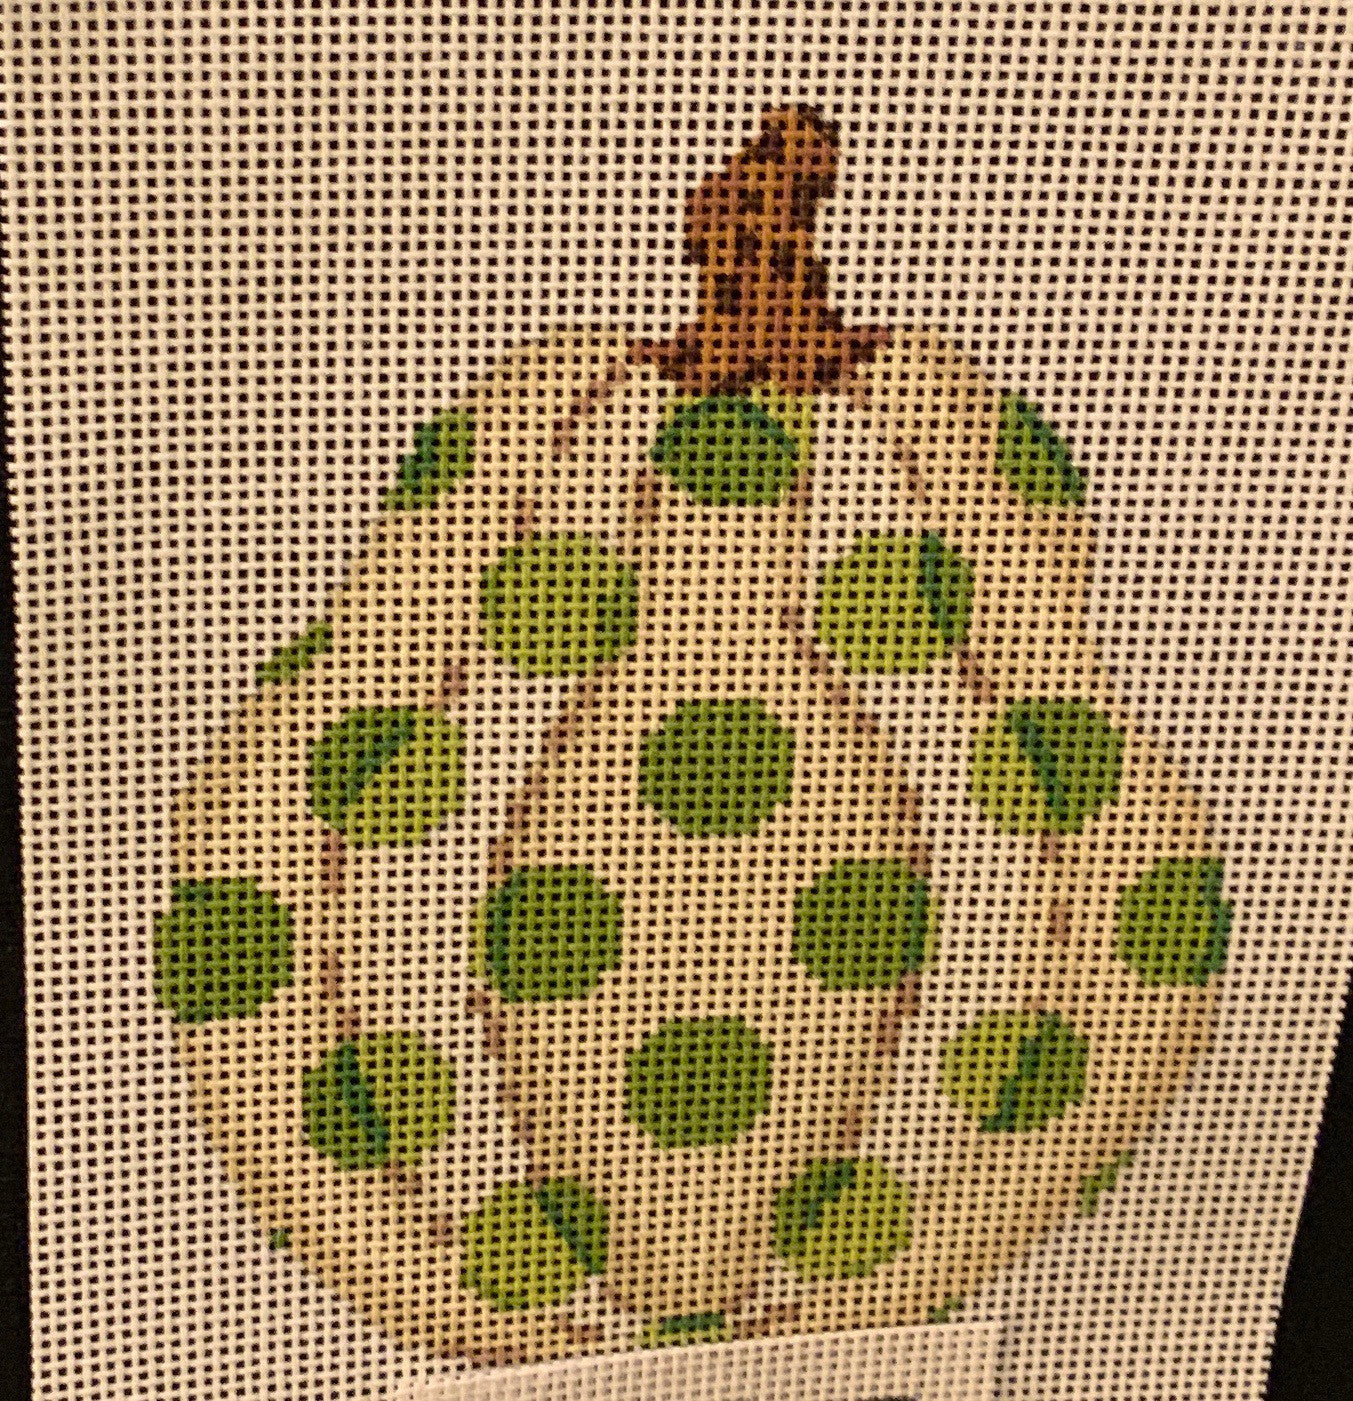 Gourd with Polka Dots